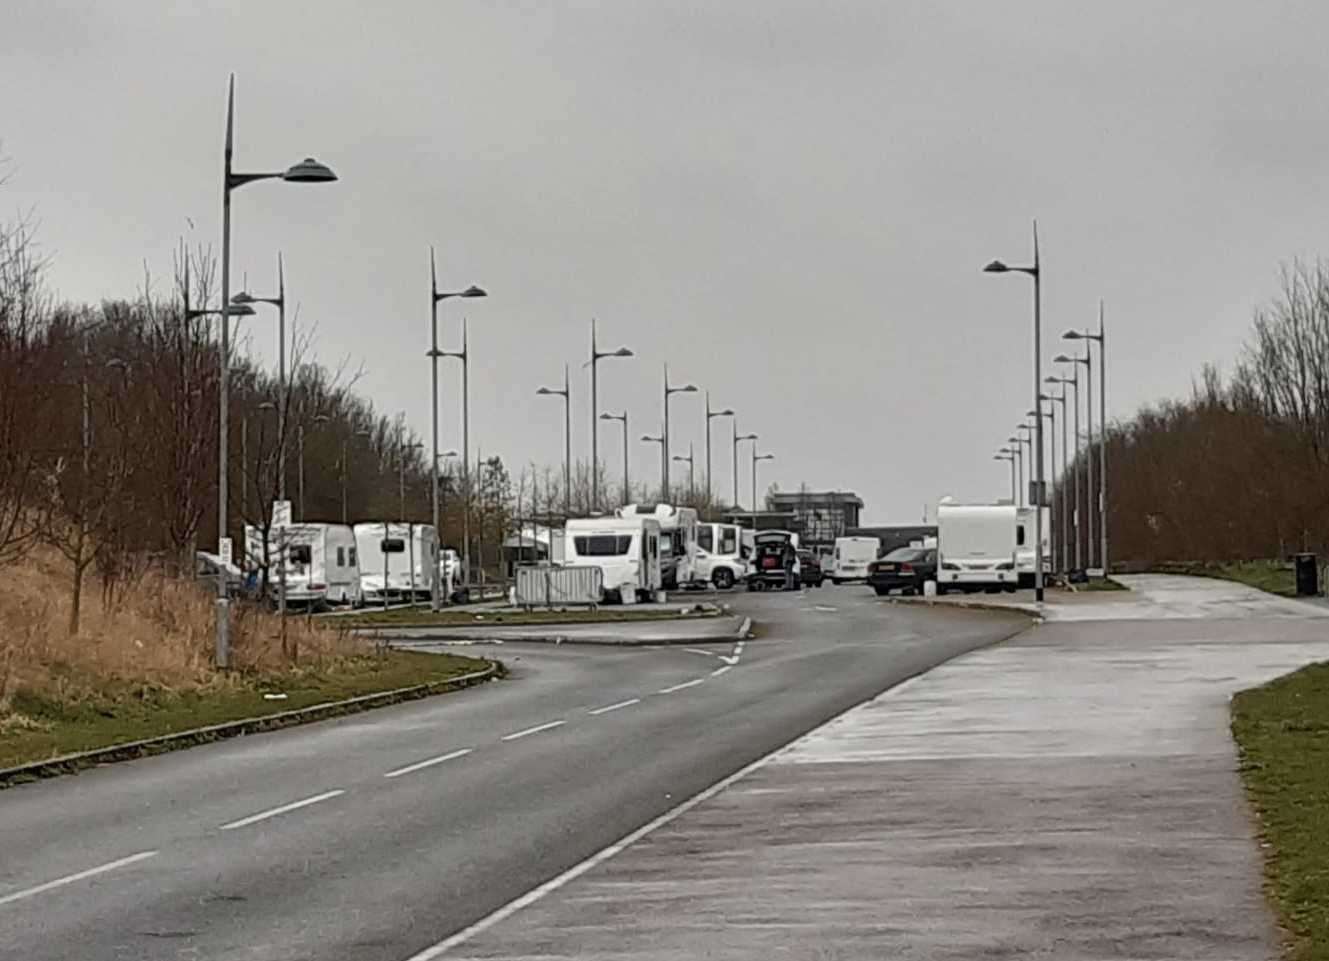 A travelling community has pitched up in the Cyclopark car park in Gravesend